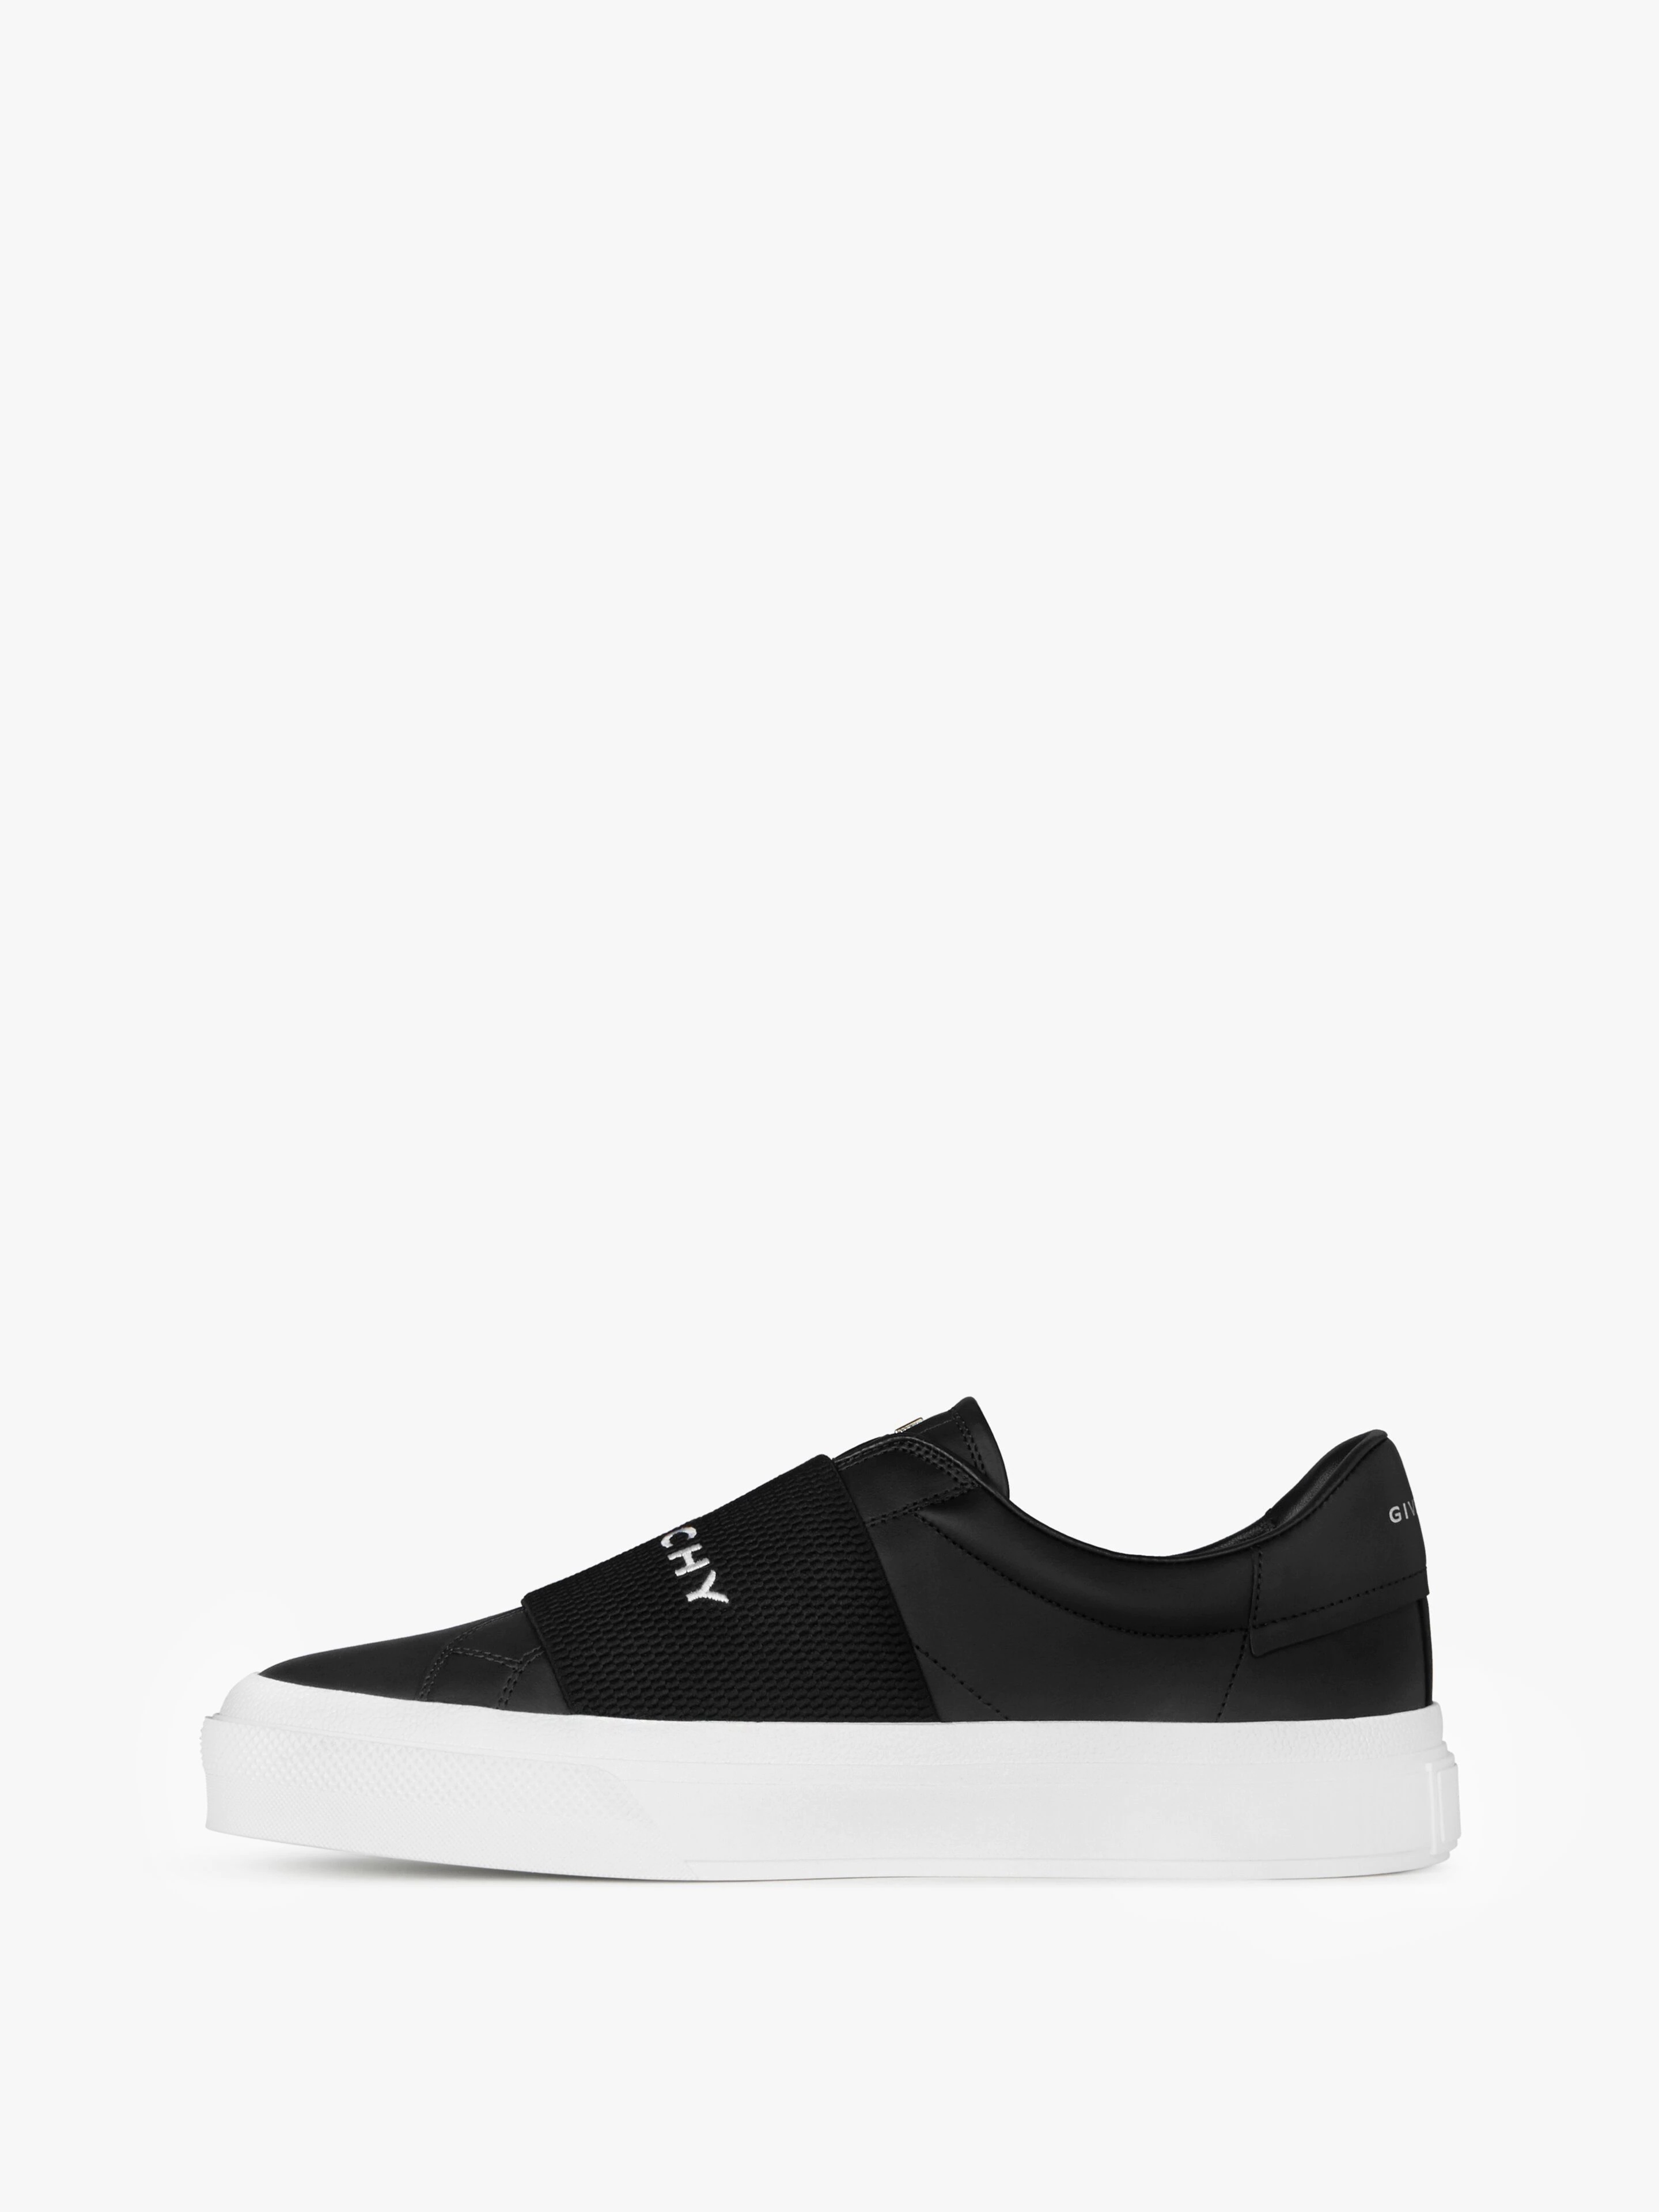 CITY SPORT SNEAKERS IN LEATHER WITH GIVENCHY STRAP - 3